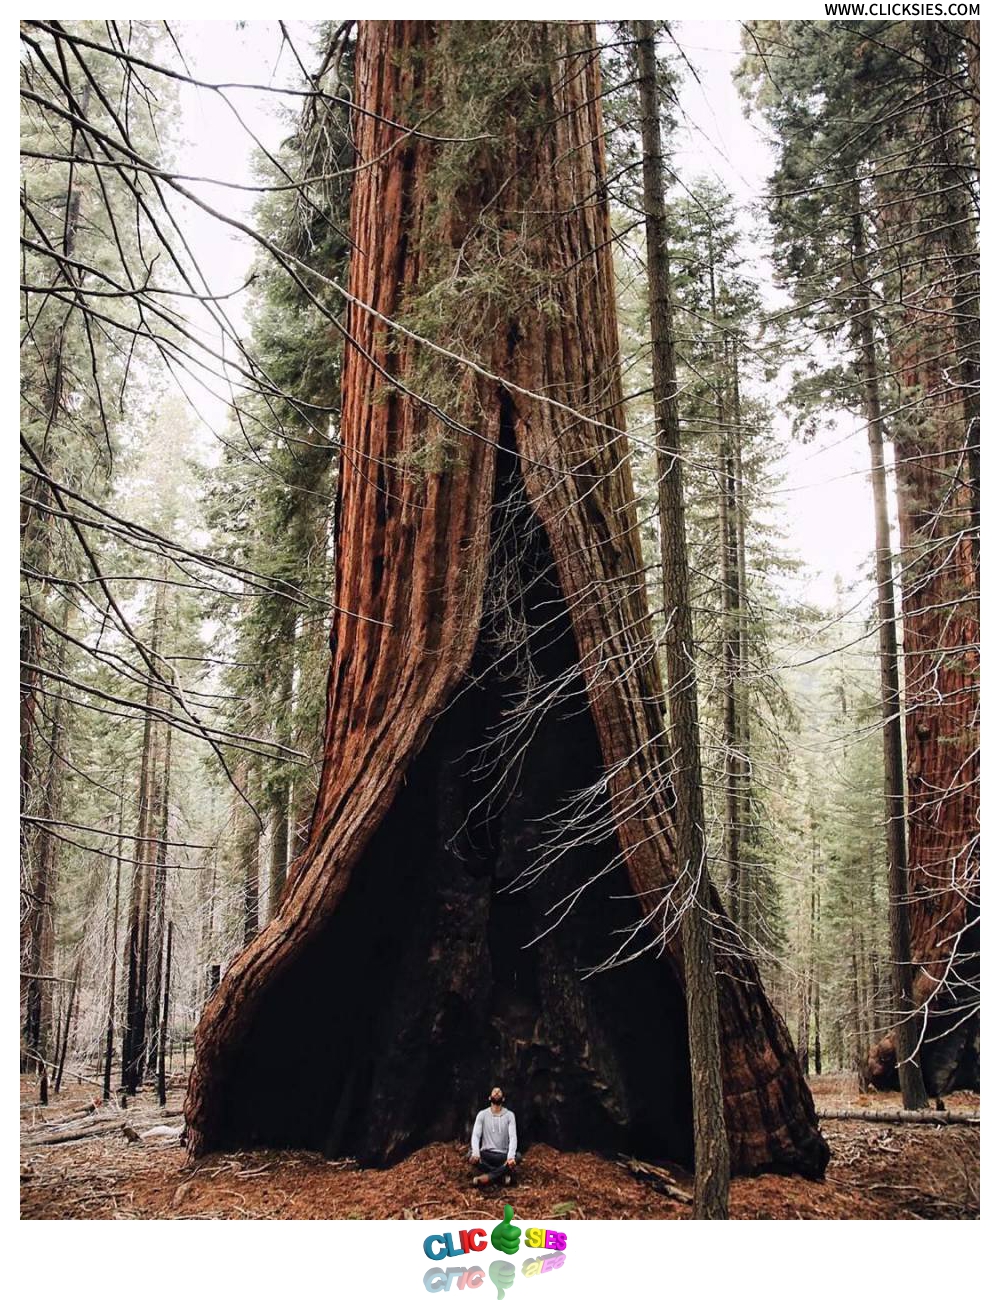 The heart tree in Sequoia National Park California - www.clicksies.com